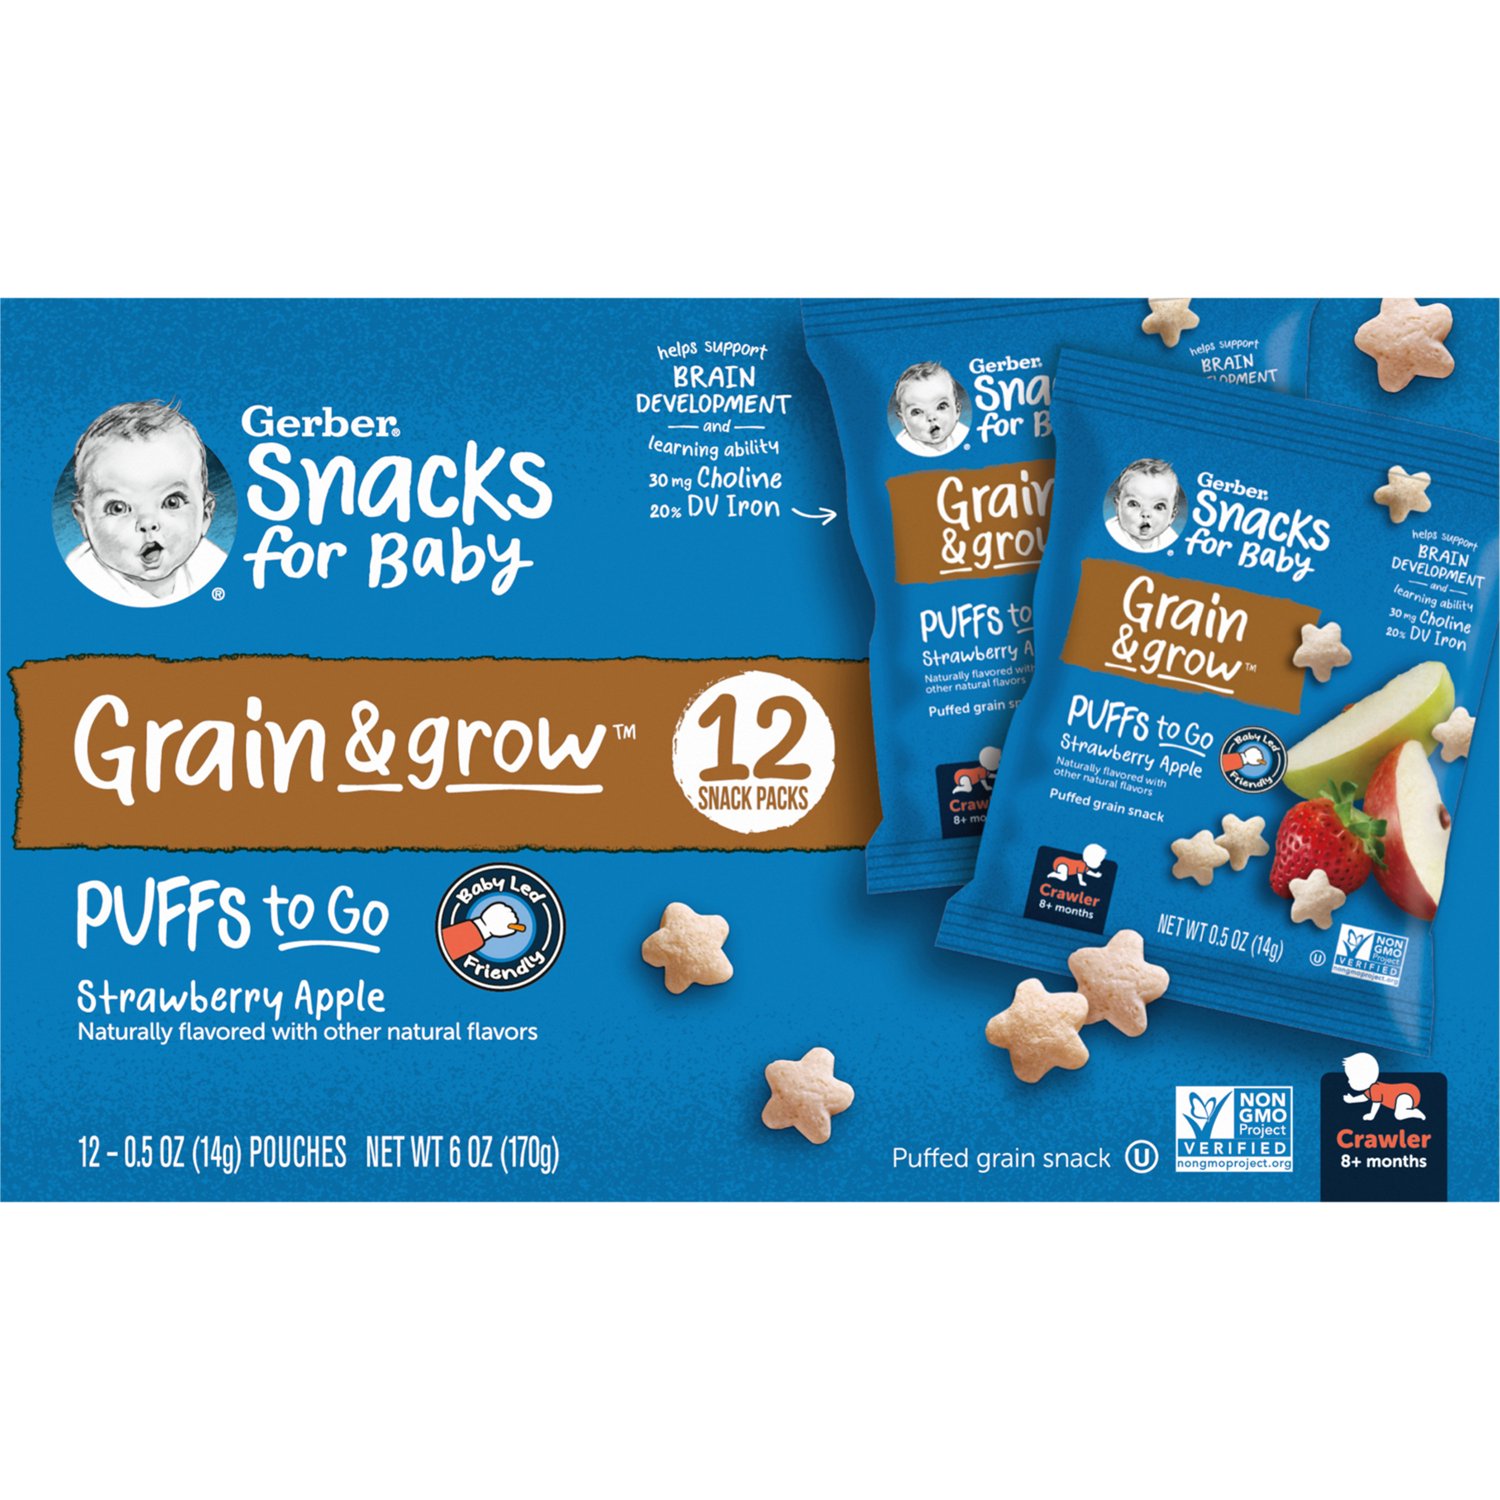 Gerber Puffs to Go Puffed Grain Snack, Strawberry Apple, 0.5 oz. Pouch (12 Pack) - image 1 of 10